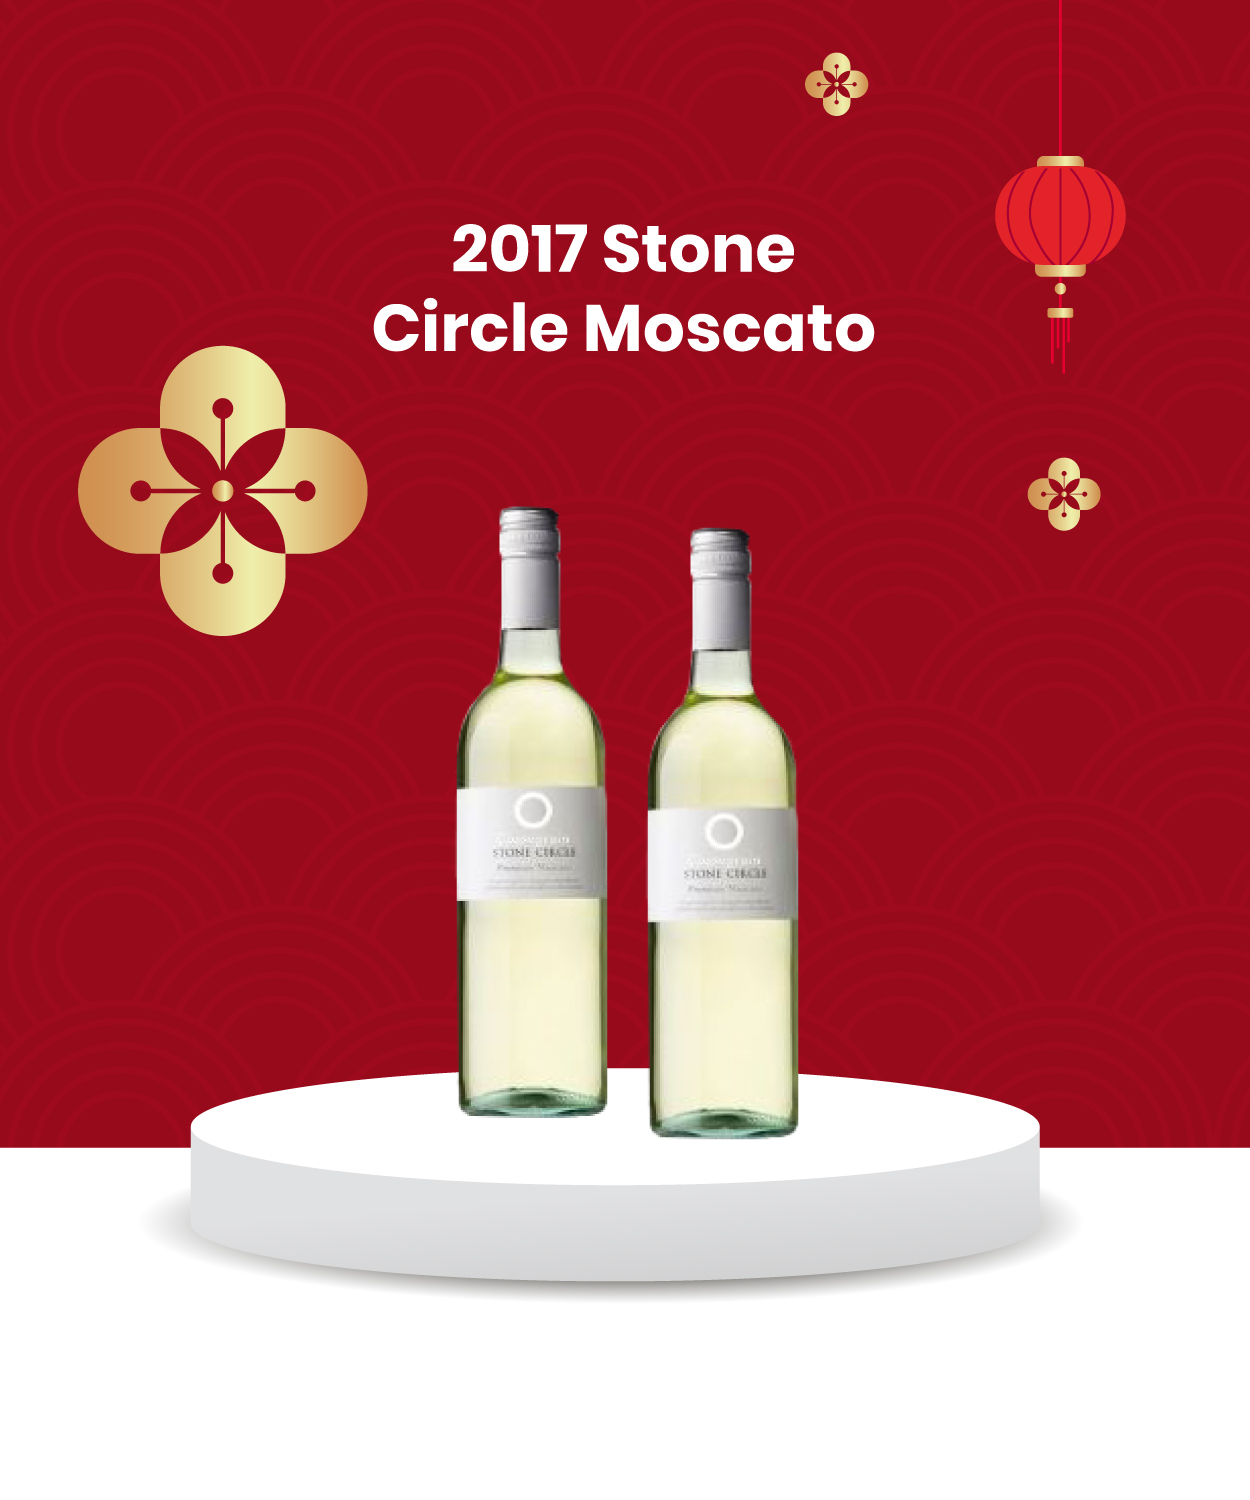 dropee-bestseller-campaign-stone-circle-moscato-item-2